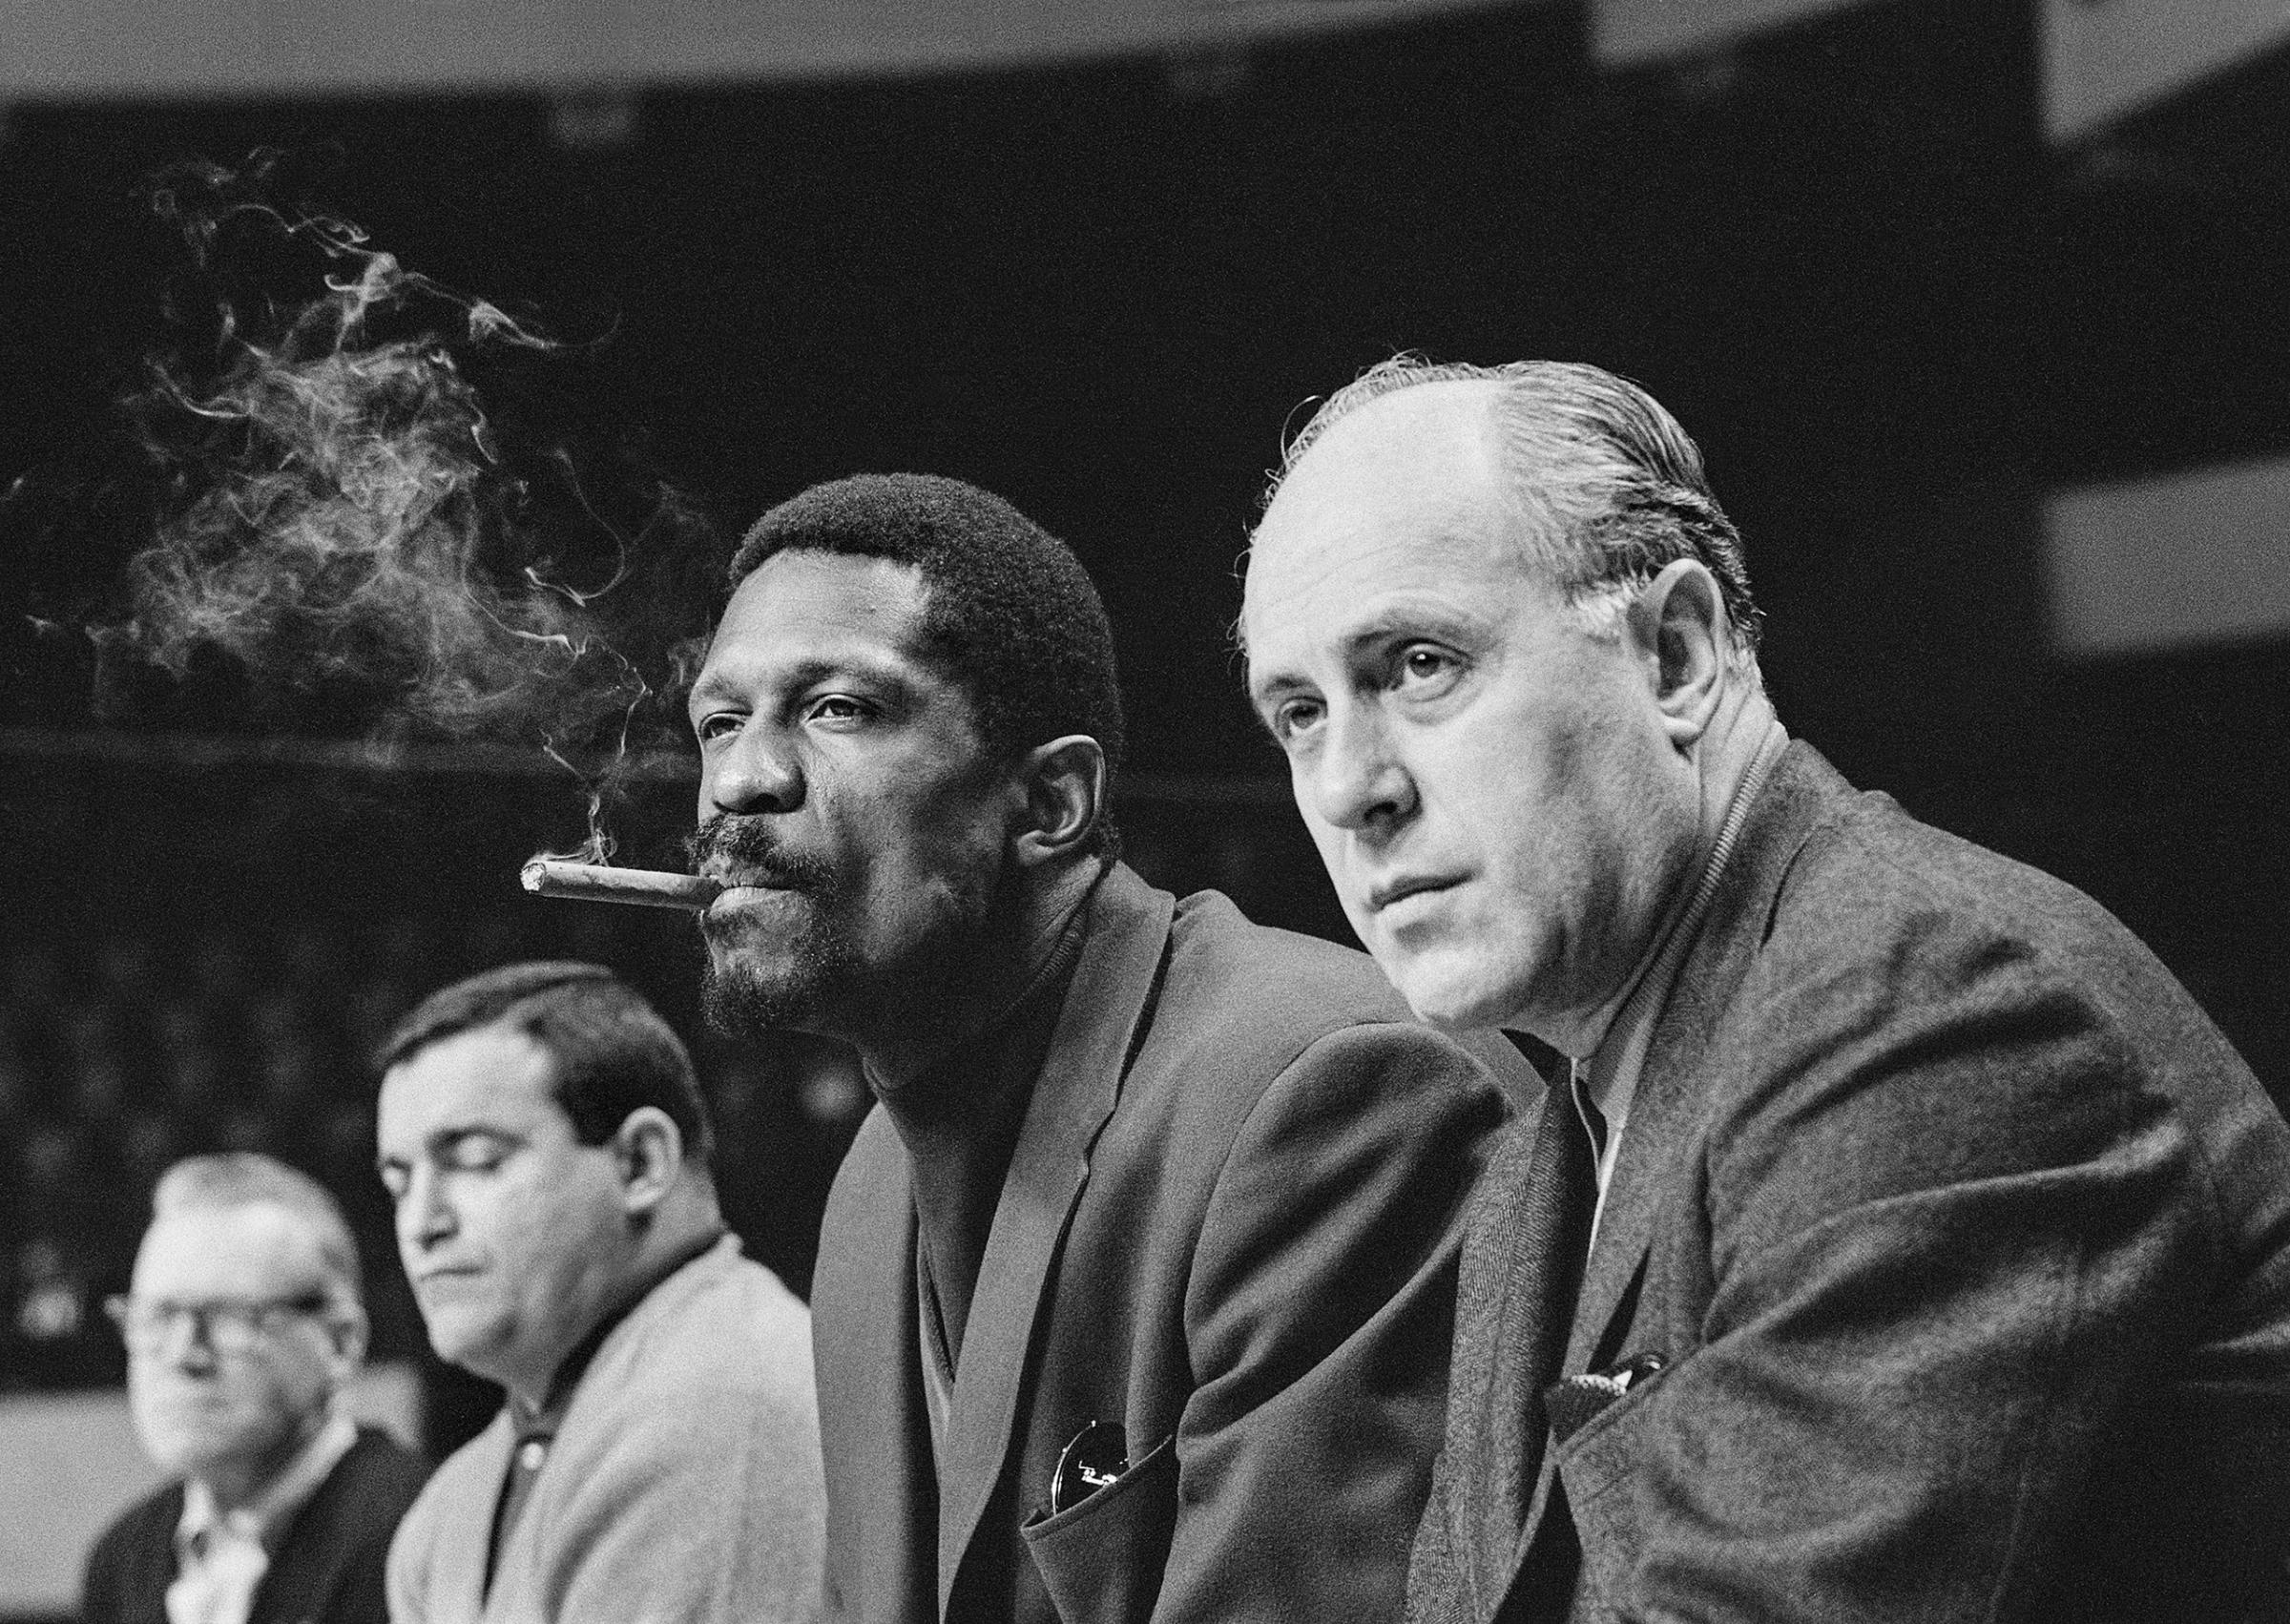 Celtics' player-coach Bill Russell with team manager Red Auerbach, Boston, 1967.